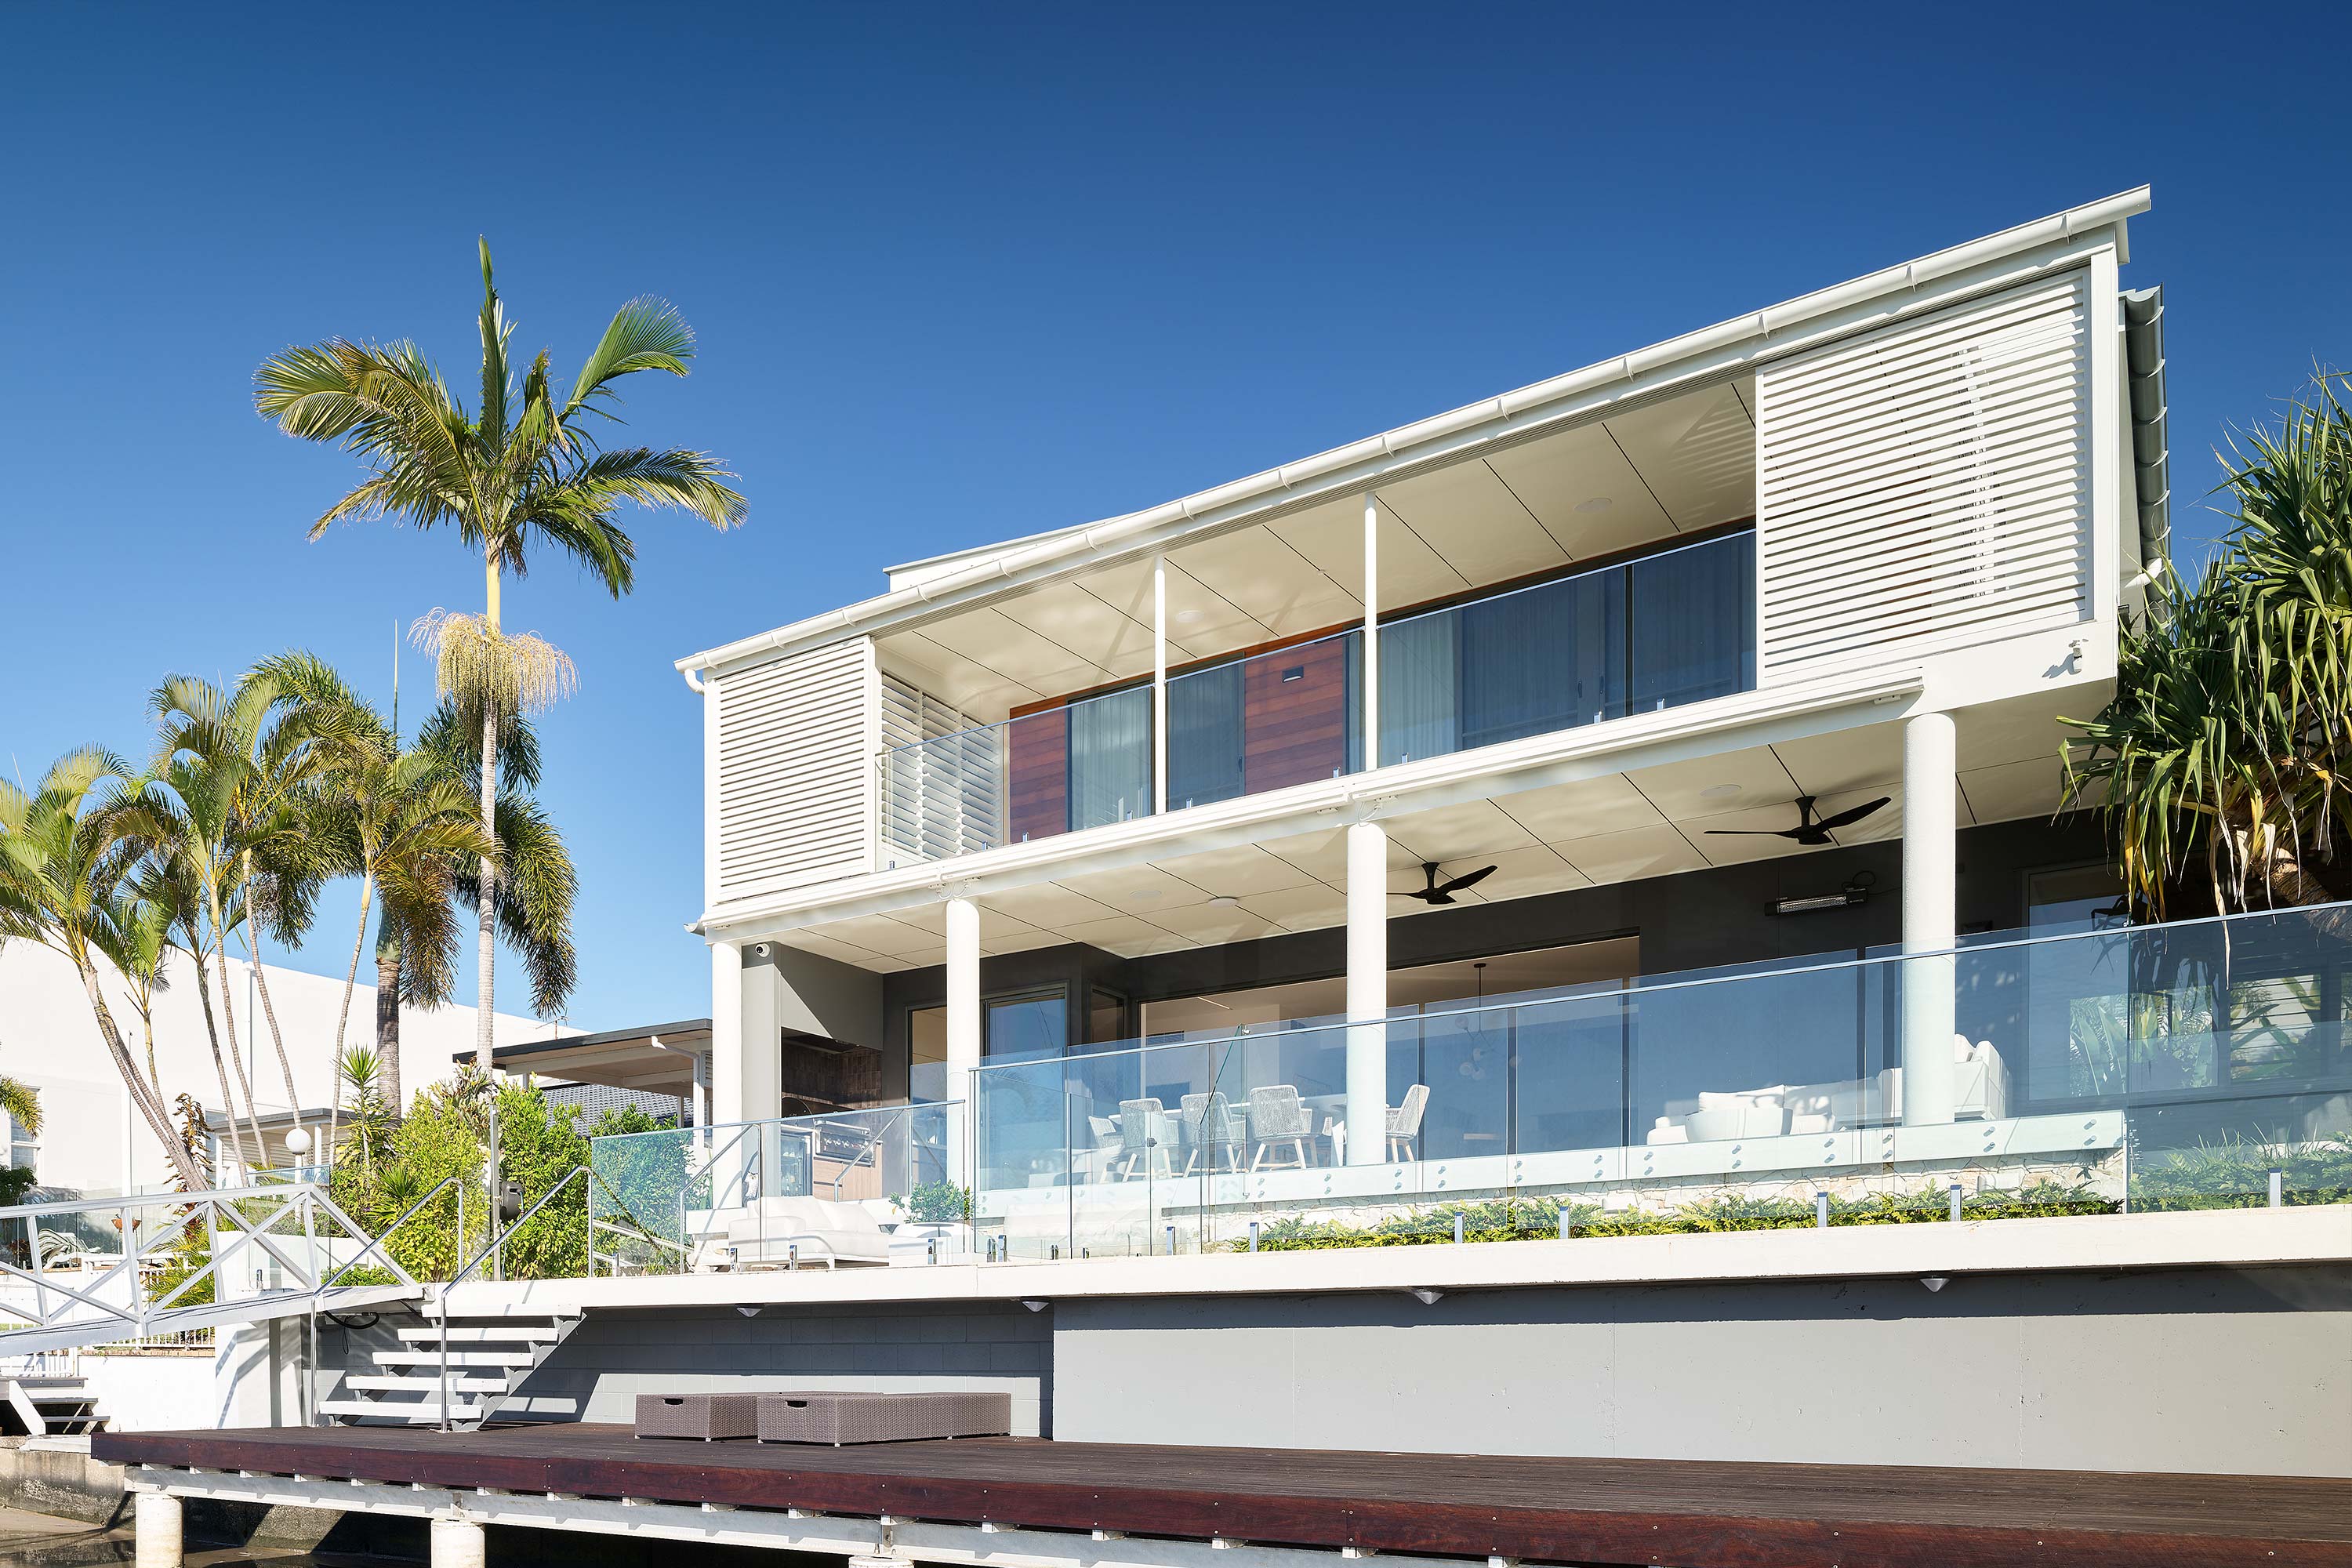 Mooloolah canal luxury residence design front-on